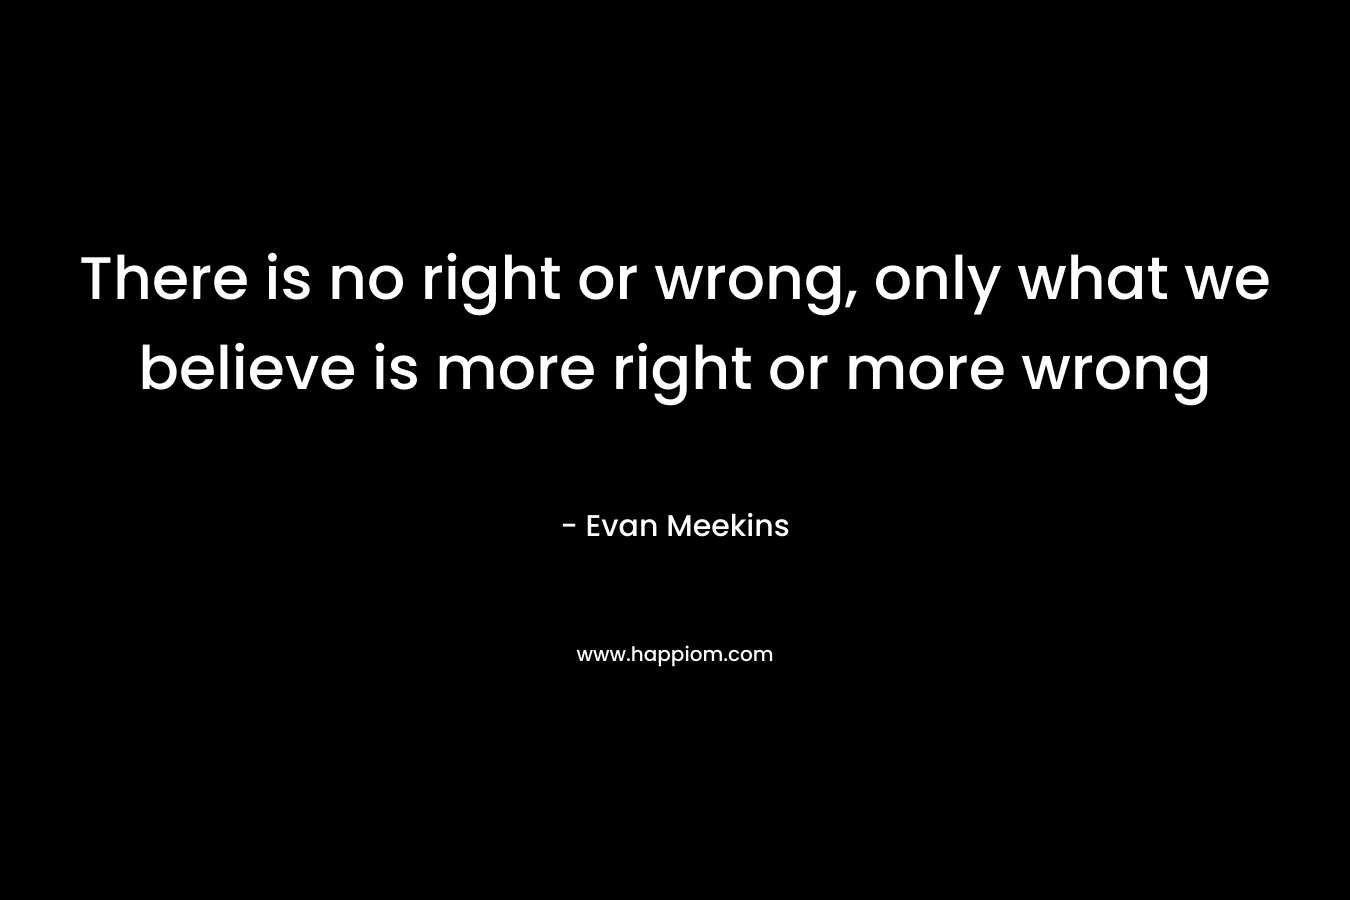 There is no right or wrong, only what we believe is more right or more wrong